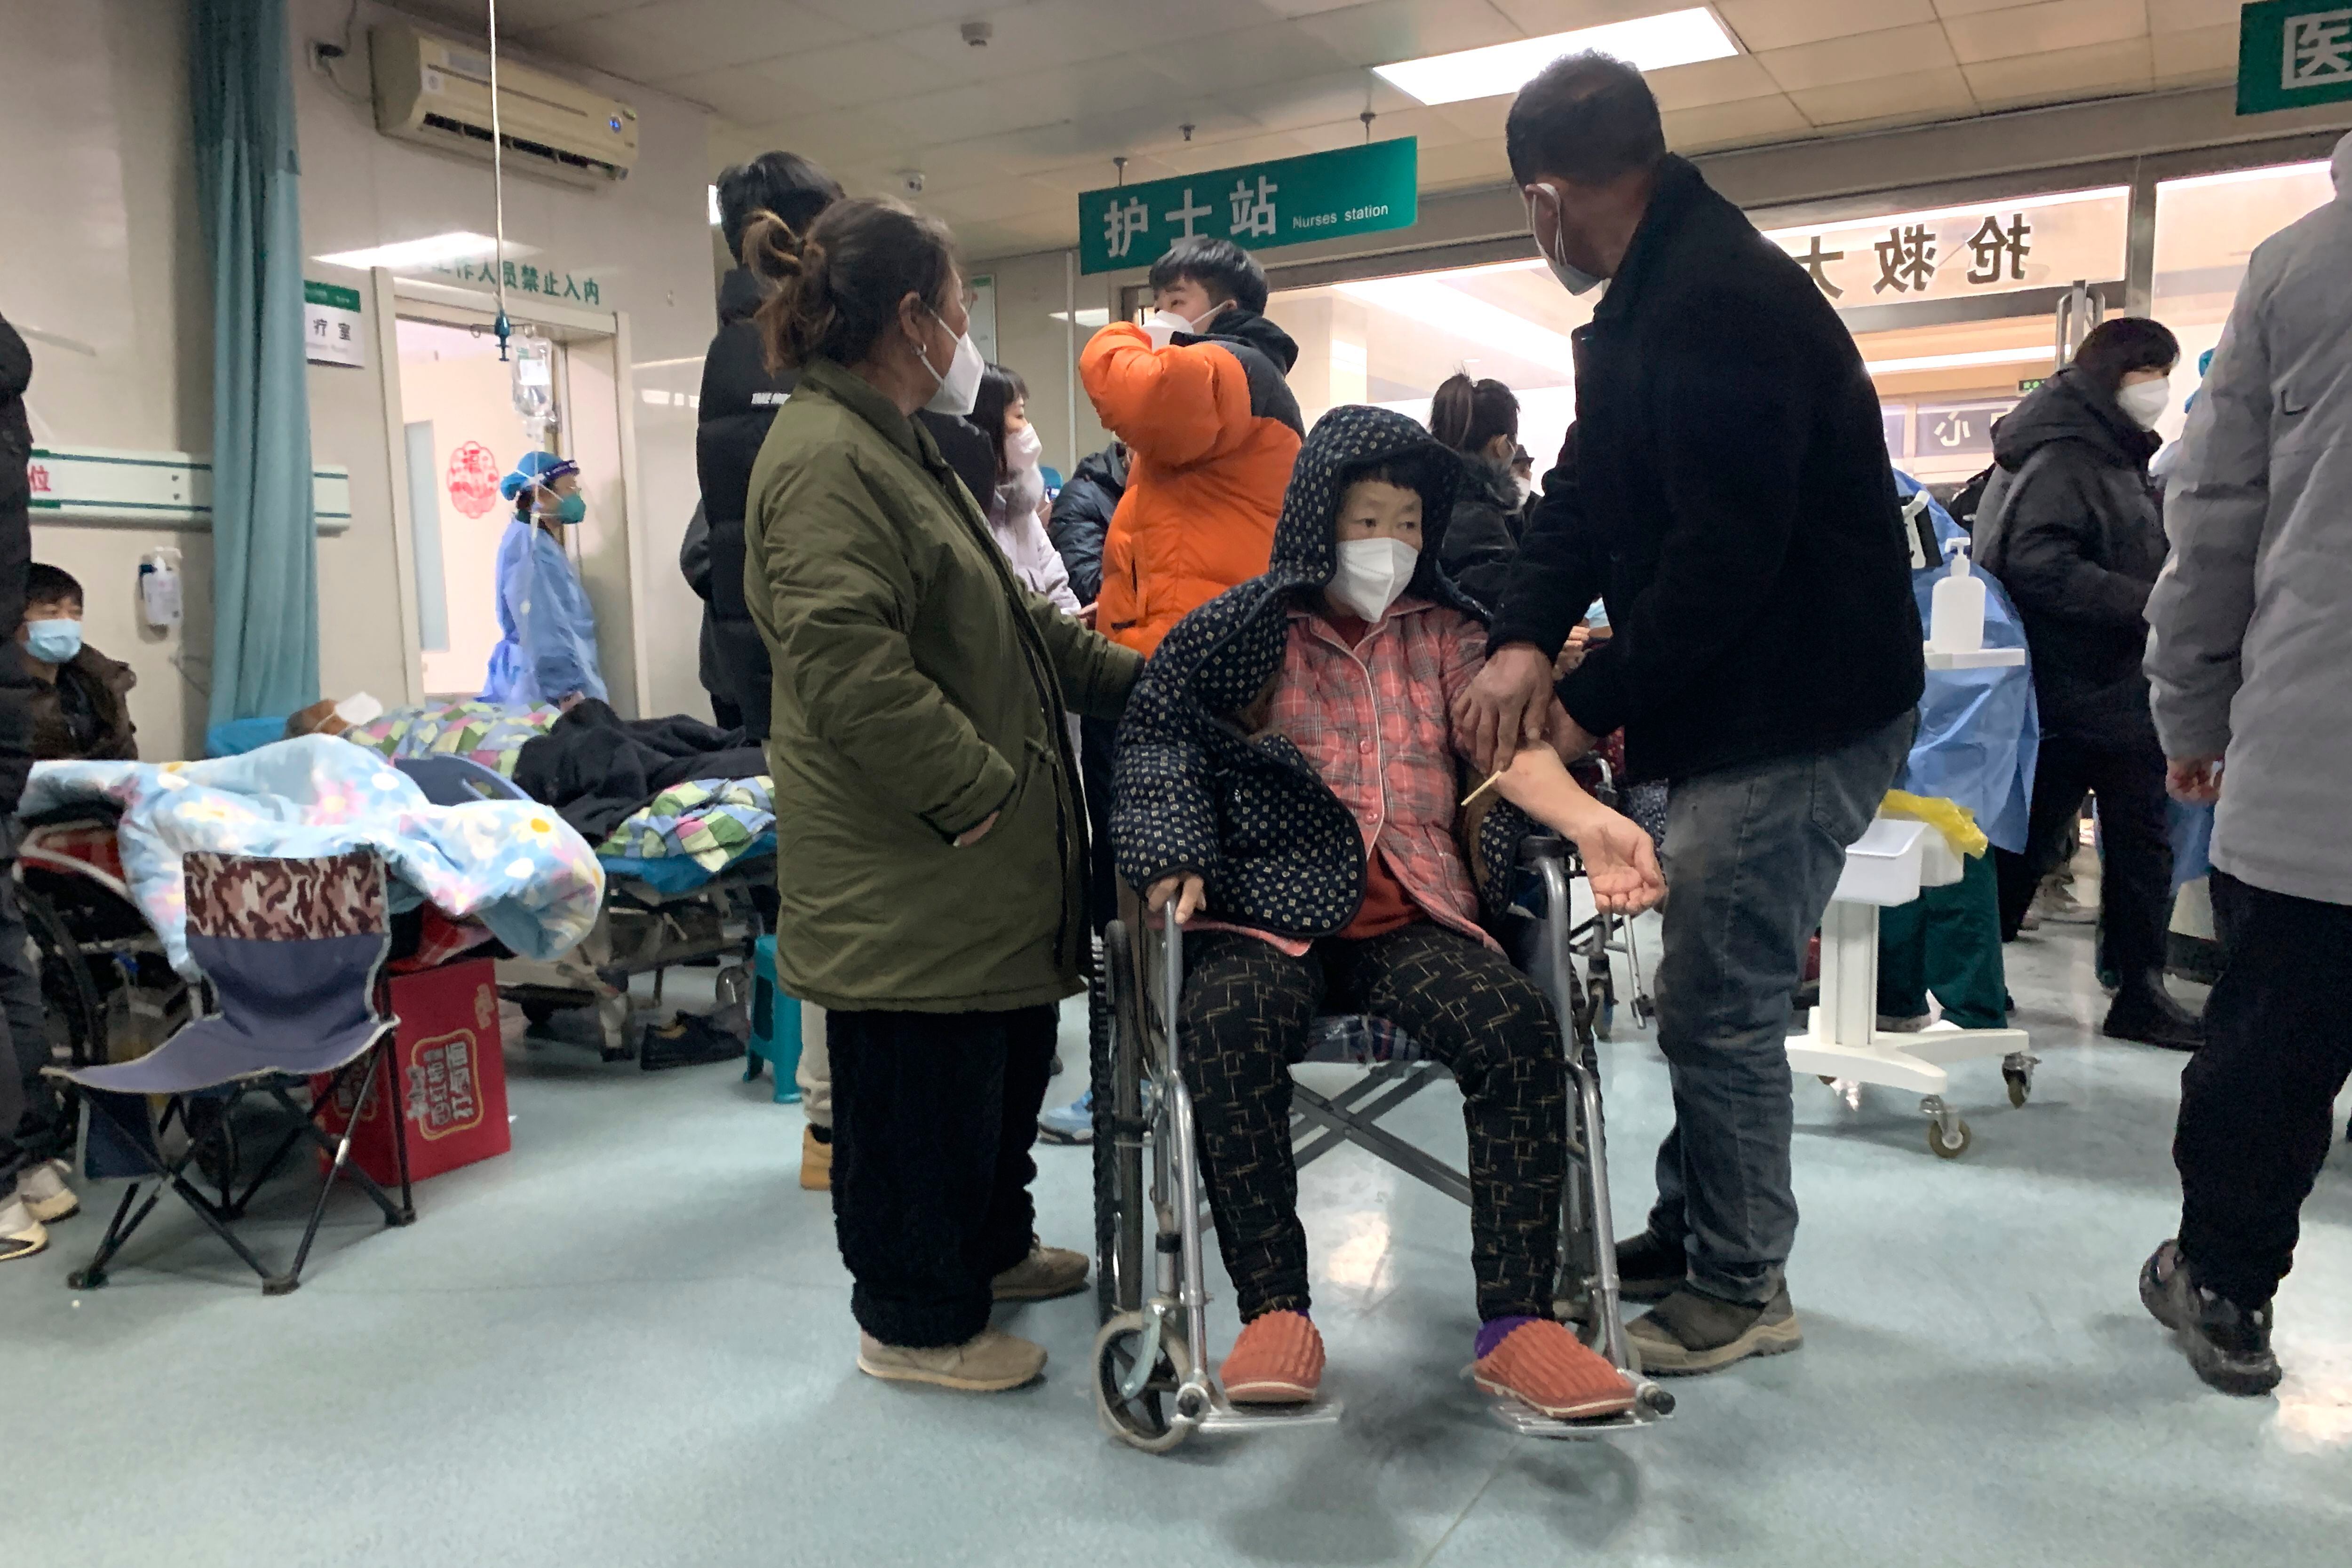 COVID-19 cases are multiplying with concern in China due to the lifting of restrictions, especially due to the low level of vaccination among the elderly population.  (AP Photo/Dake Kang)